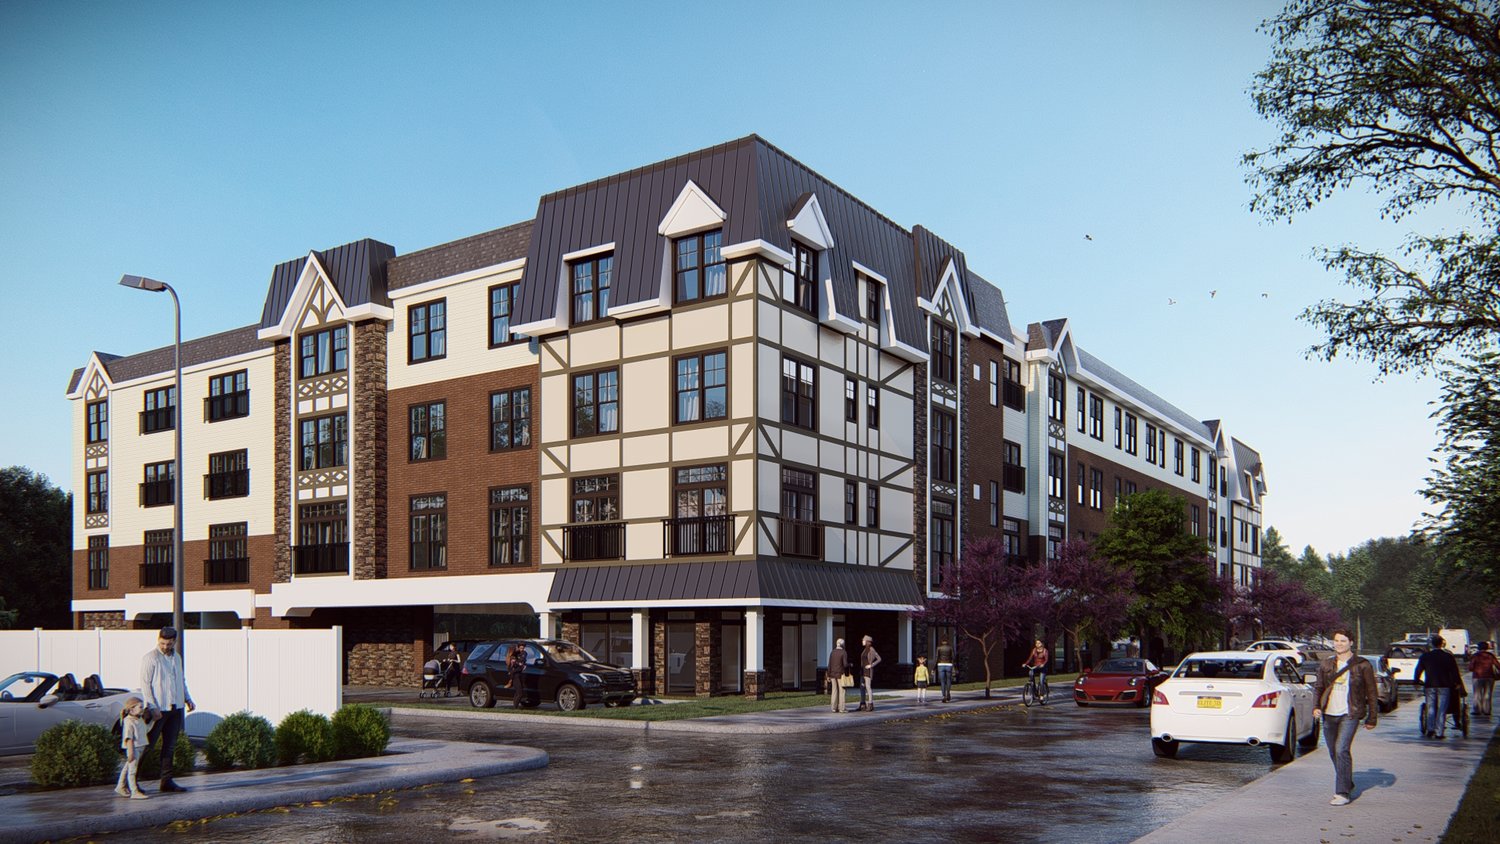 The Nassau County Industrial Development Agency approved a 20-year payment in lieu of taxes agreement, or PILOT, to build this $24 million, 80-unit Tudor-style apartment complex at the site of the Capri Lynbrook Motor Inn.